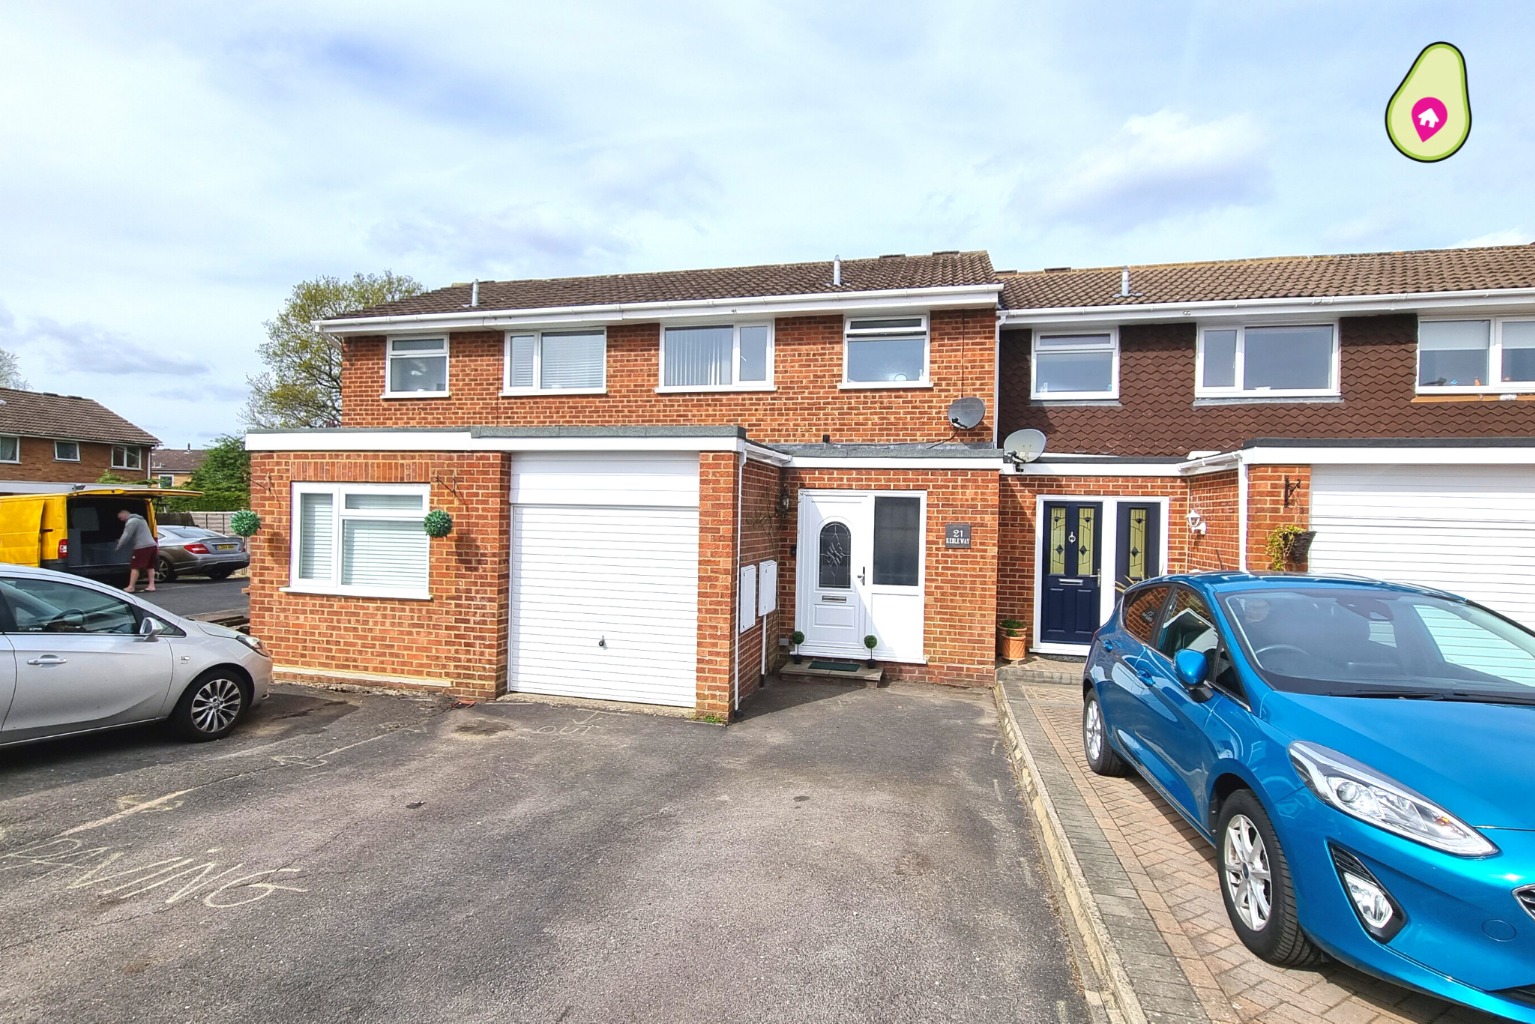 This two bedroom terrace home is ready to move straight into and offers some fantastic accommodation. Benefitting from driveway parking, a cul de sac location and close to local amen ties, this home would make the perfect first time purchase.